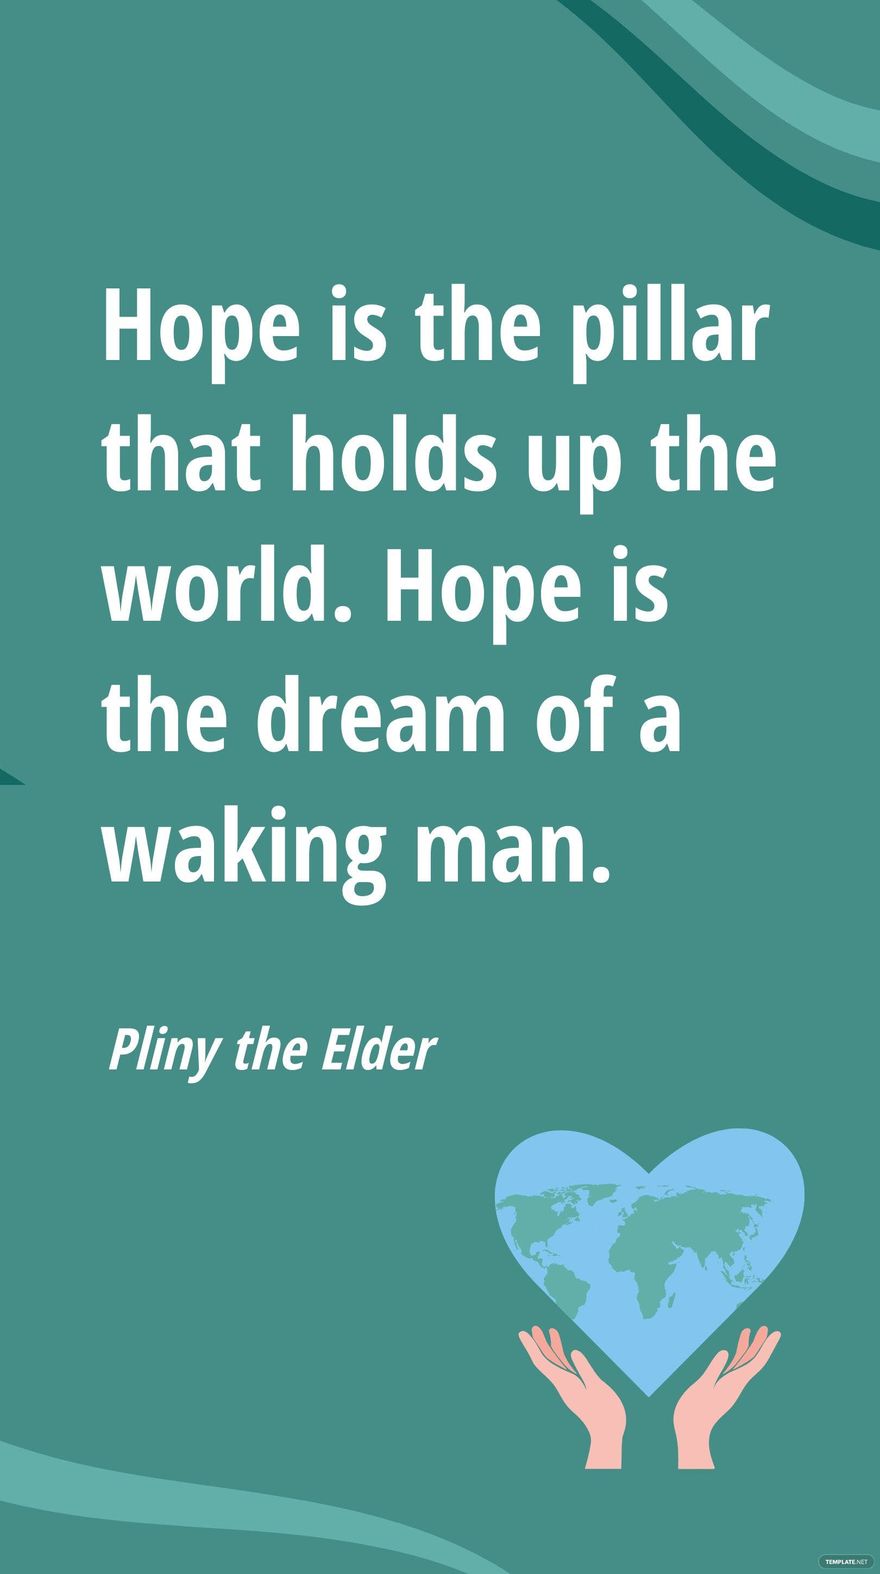 Free Pliny the Elder - Hope is the pillar that holds up the world. Hope is the dream of a waking man. in JPG